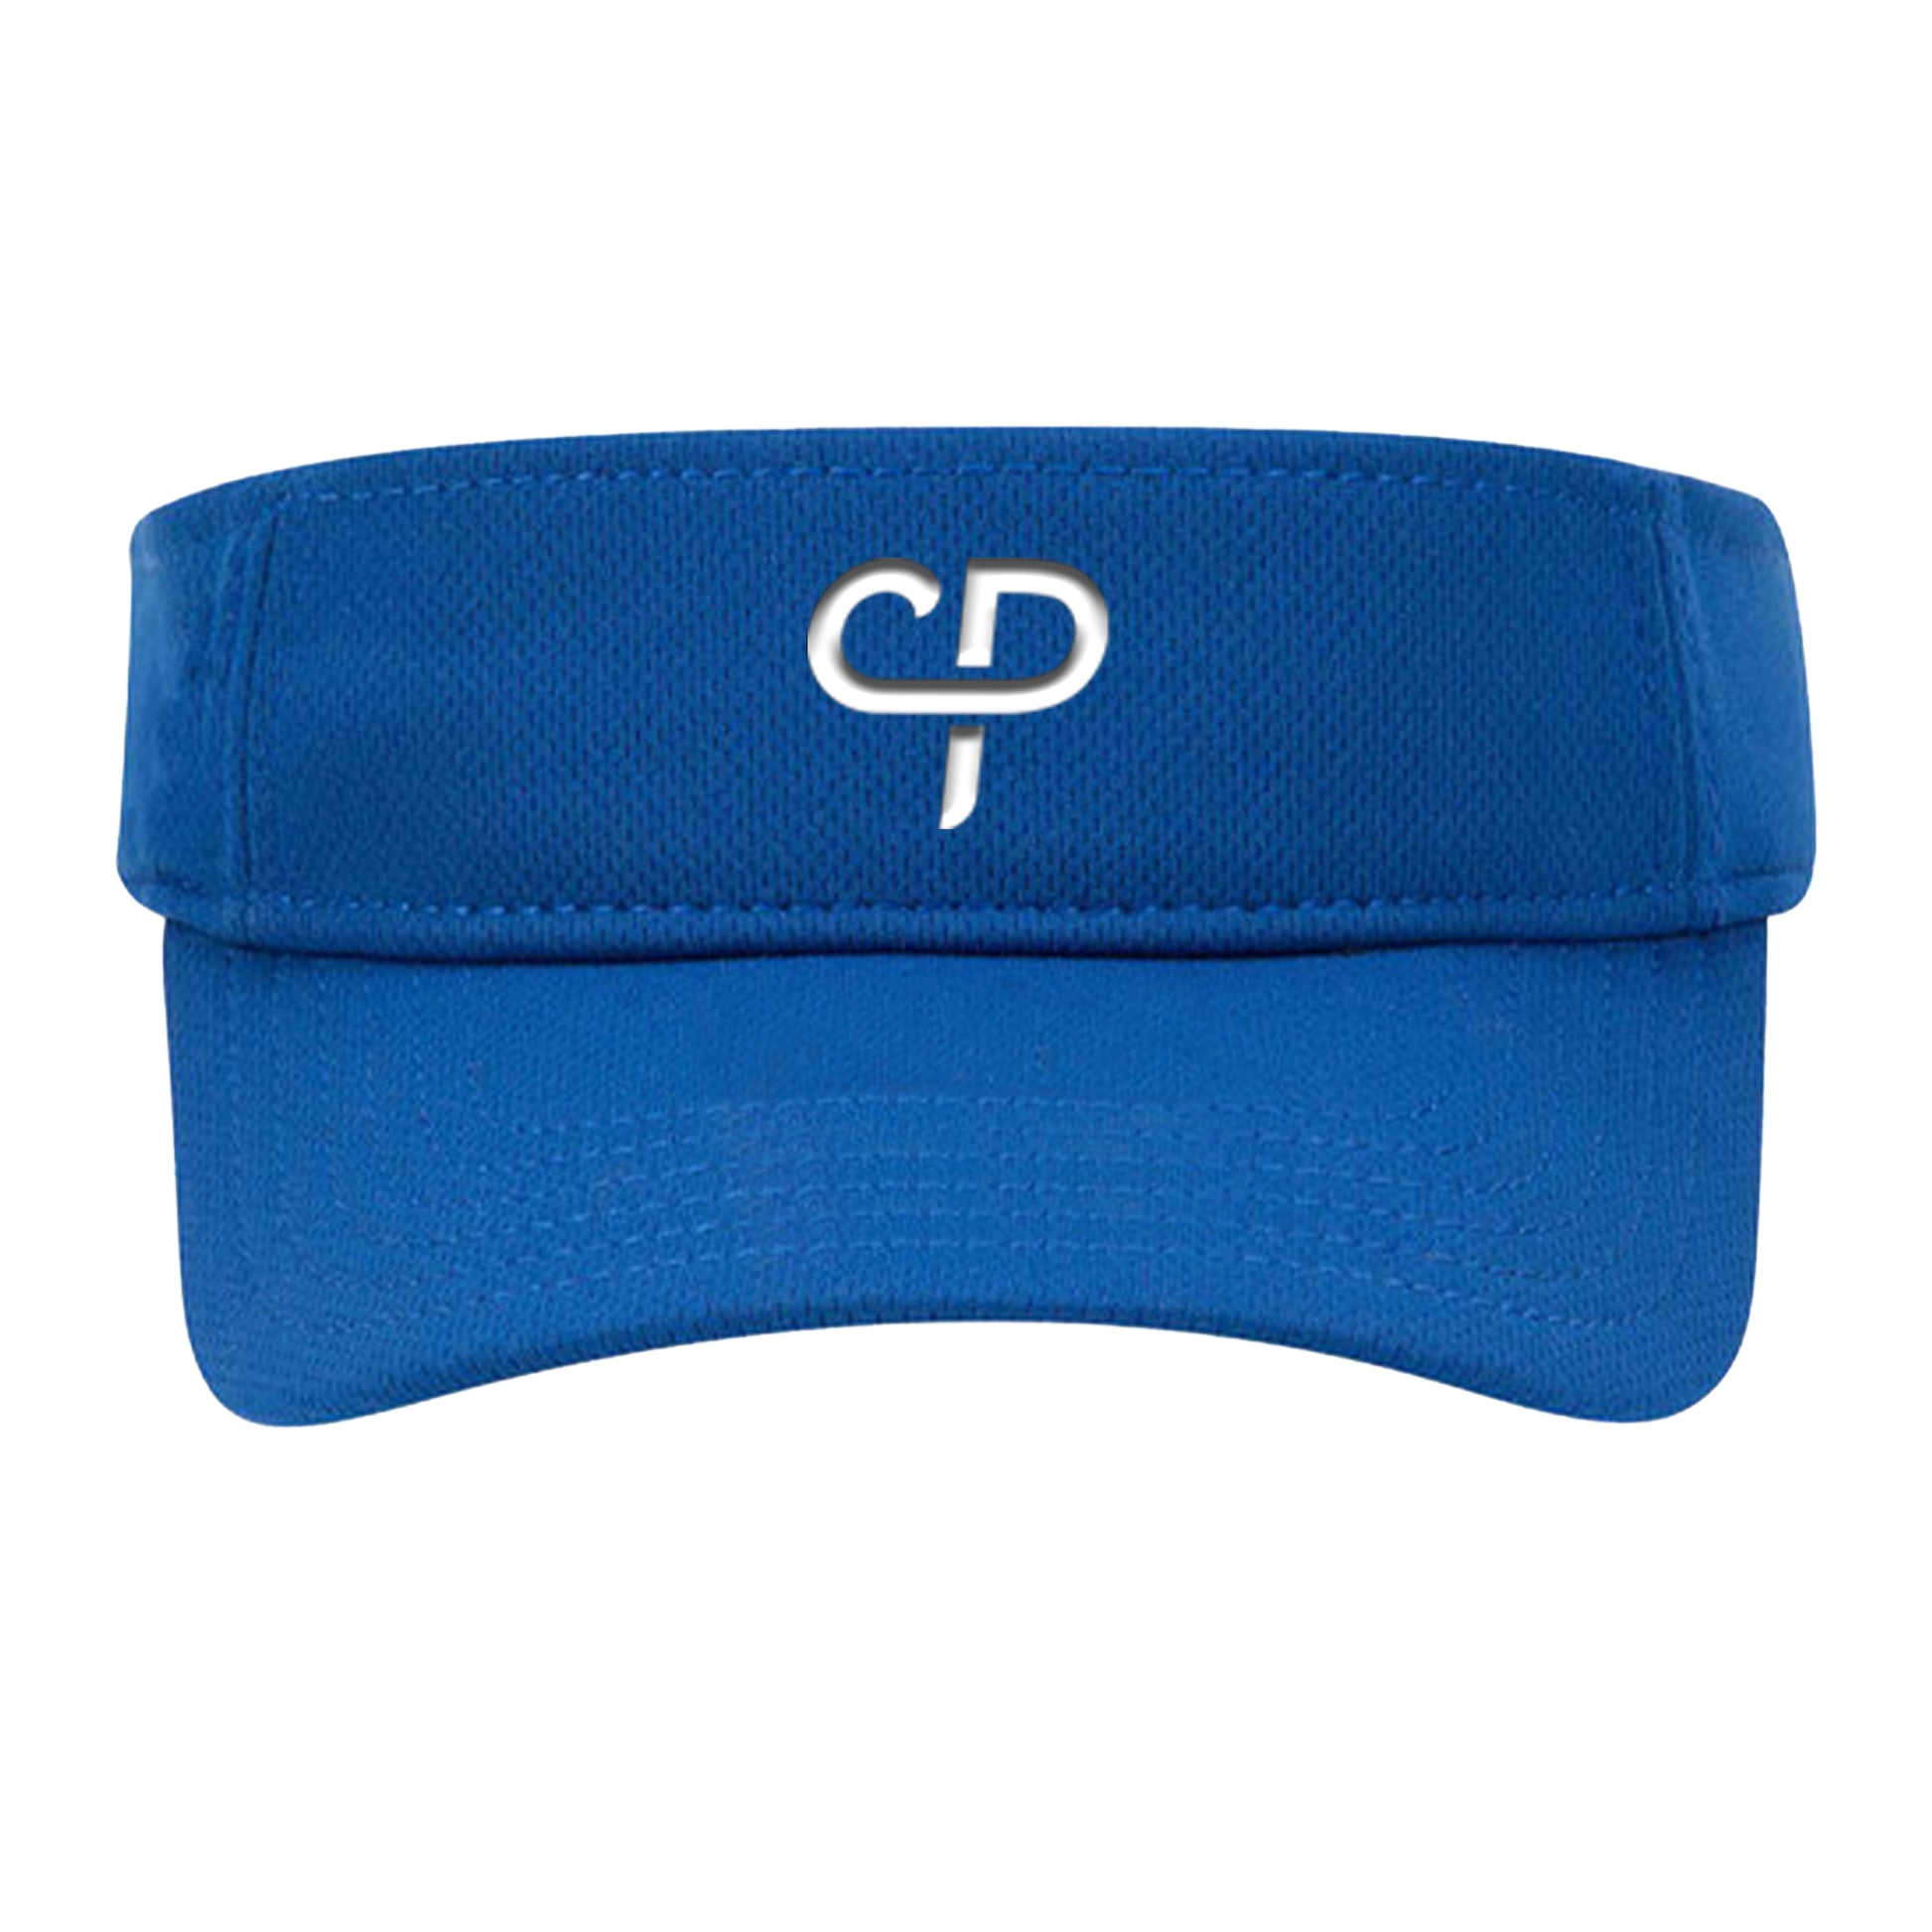 CP Parenteau pickleball athletic performance visor in royal blue front view white logo